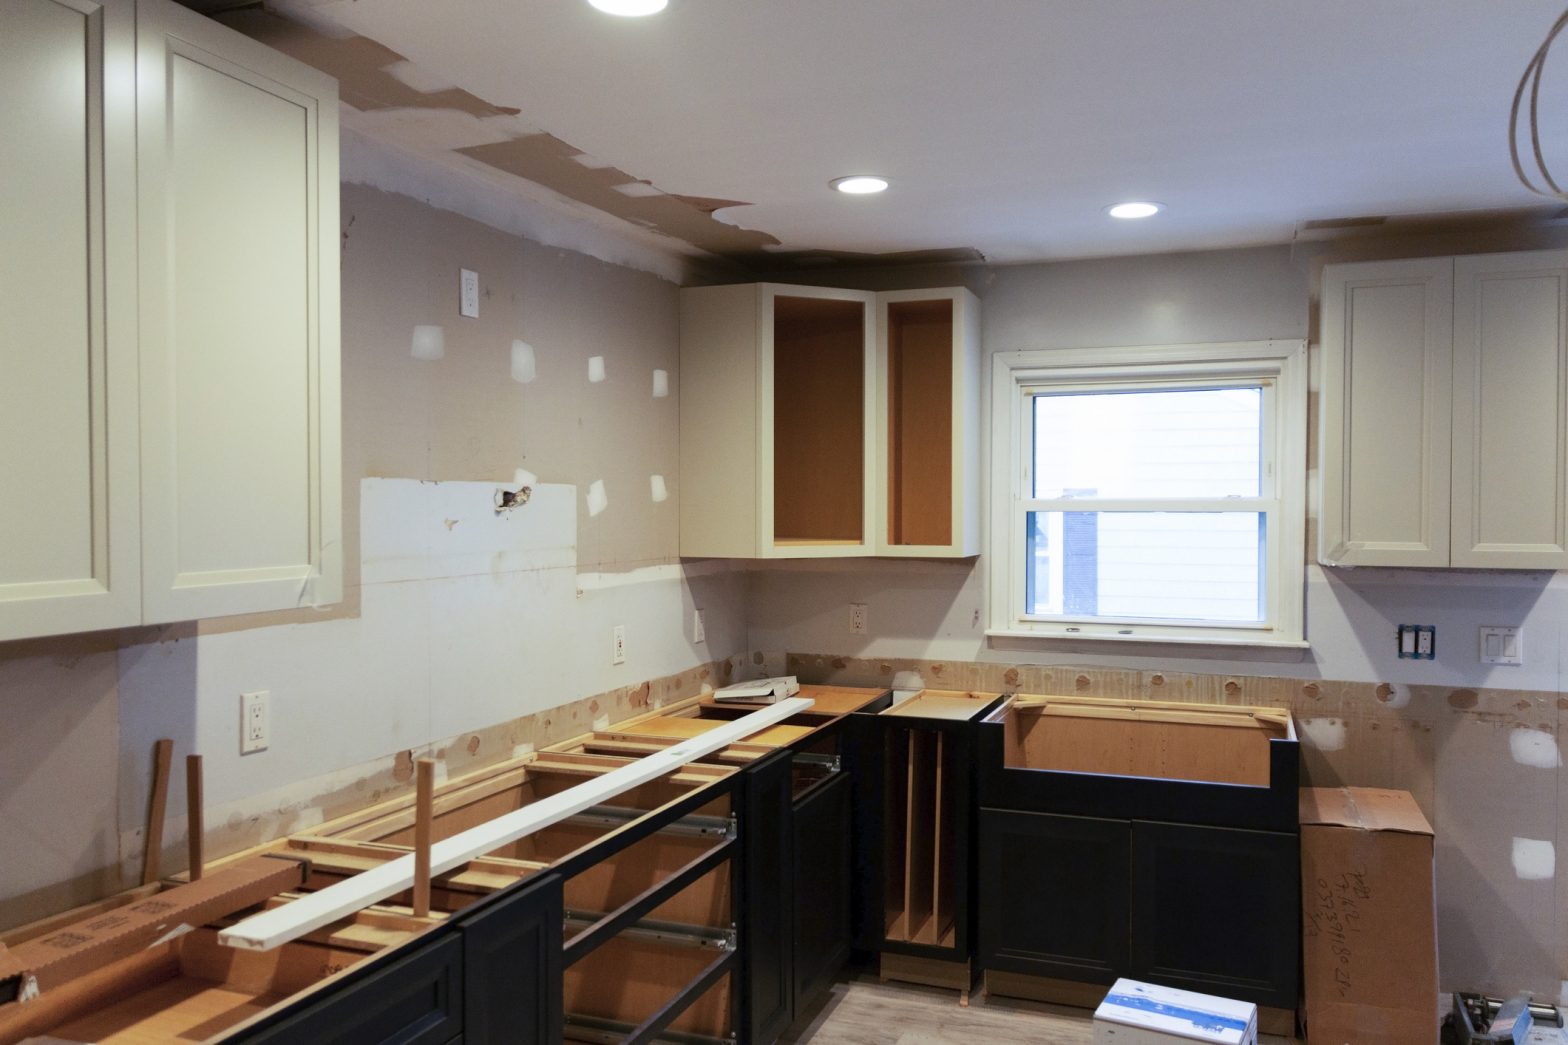 kitchen being remodeled with no countertops or appliances yet.